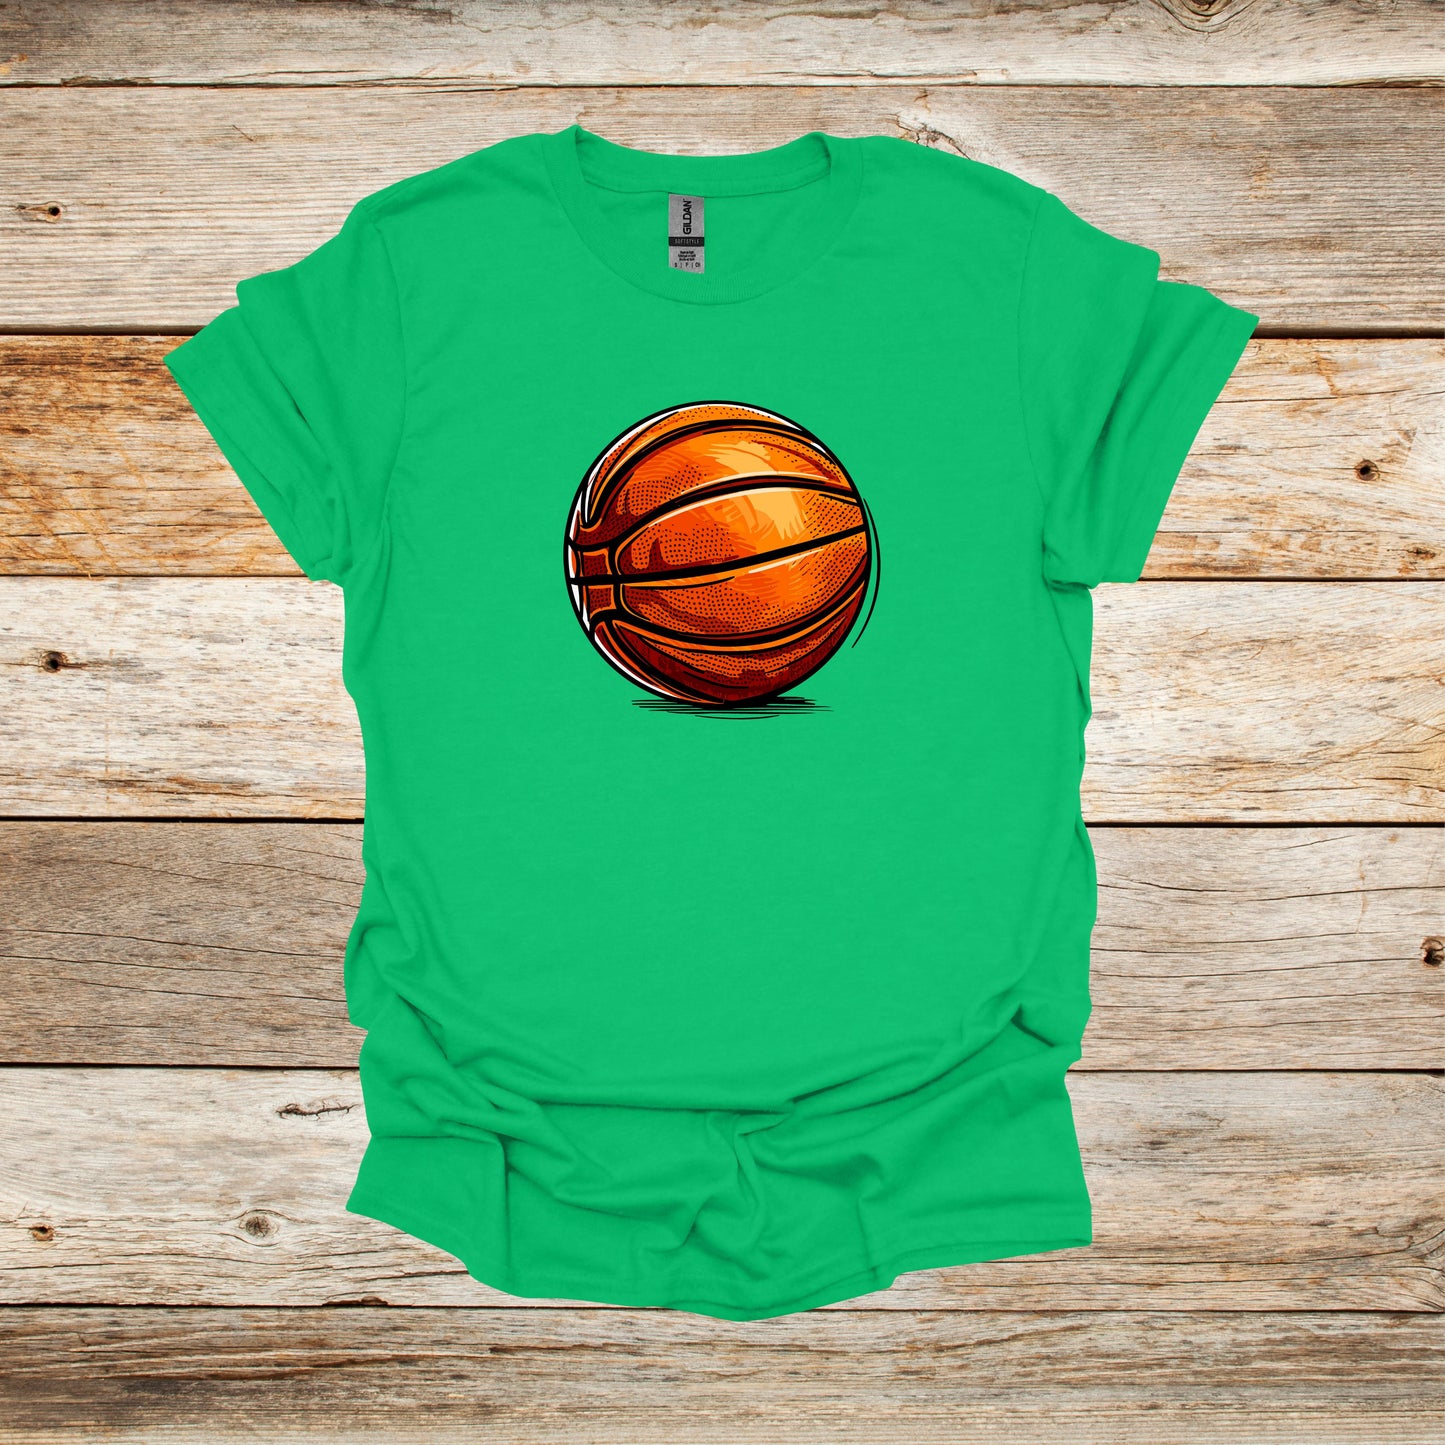 Basketball T-Shirt - Adult and Children's Tee Shirts - Sports T-Shirts Graphic Avenue Kelly Green Adult Small 